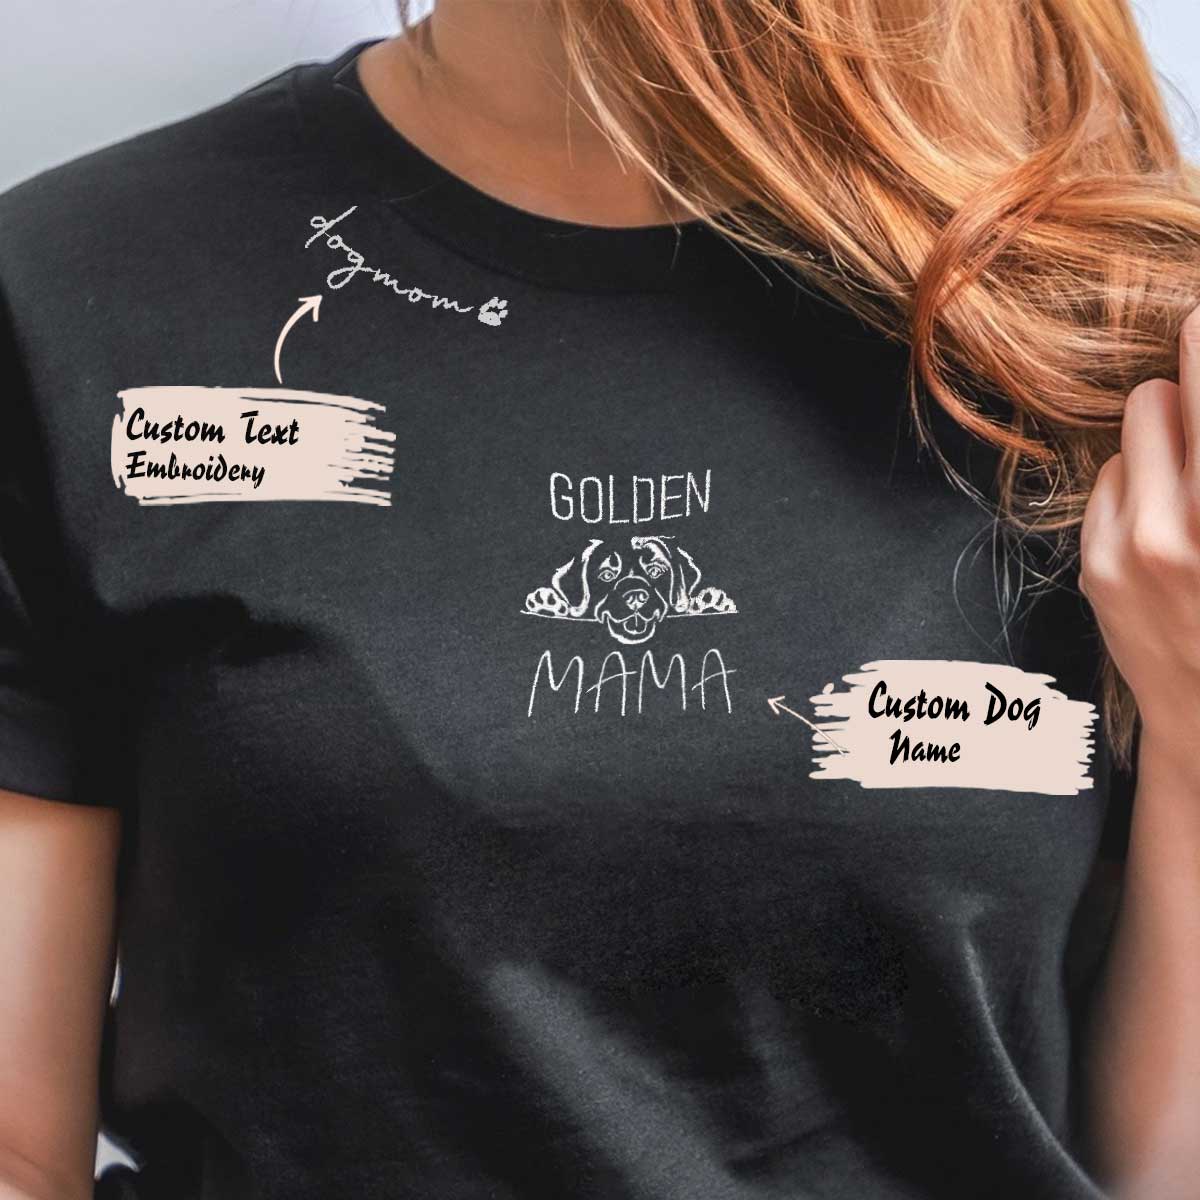 Custom Golden Retriever Dog Mama Embroidered Collar Shirt, Personalized Shirt with Dog Name, Gifts for Golden Retriever Lovers